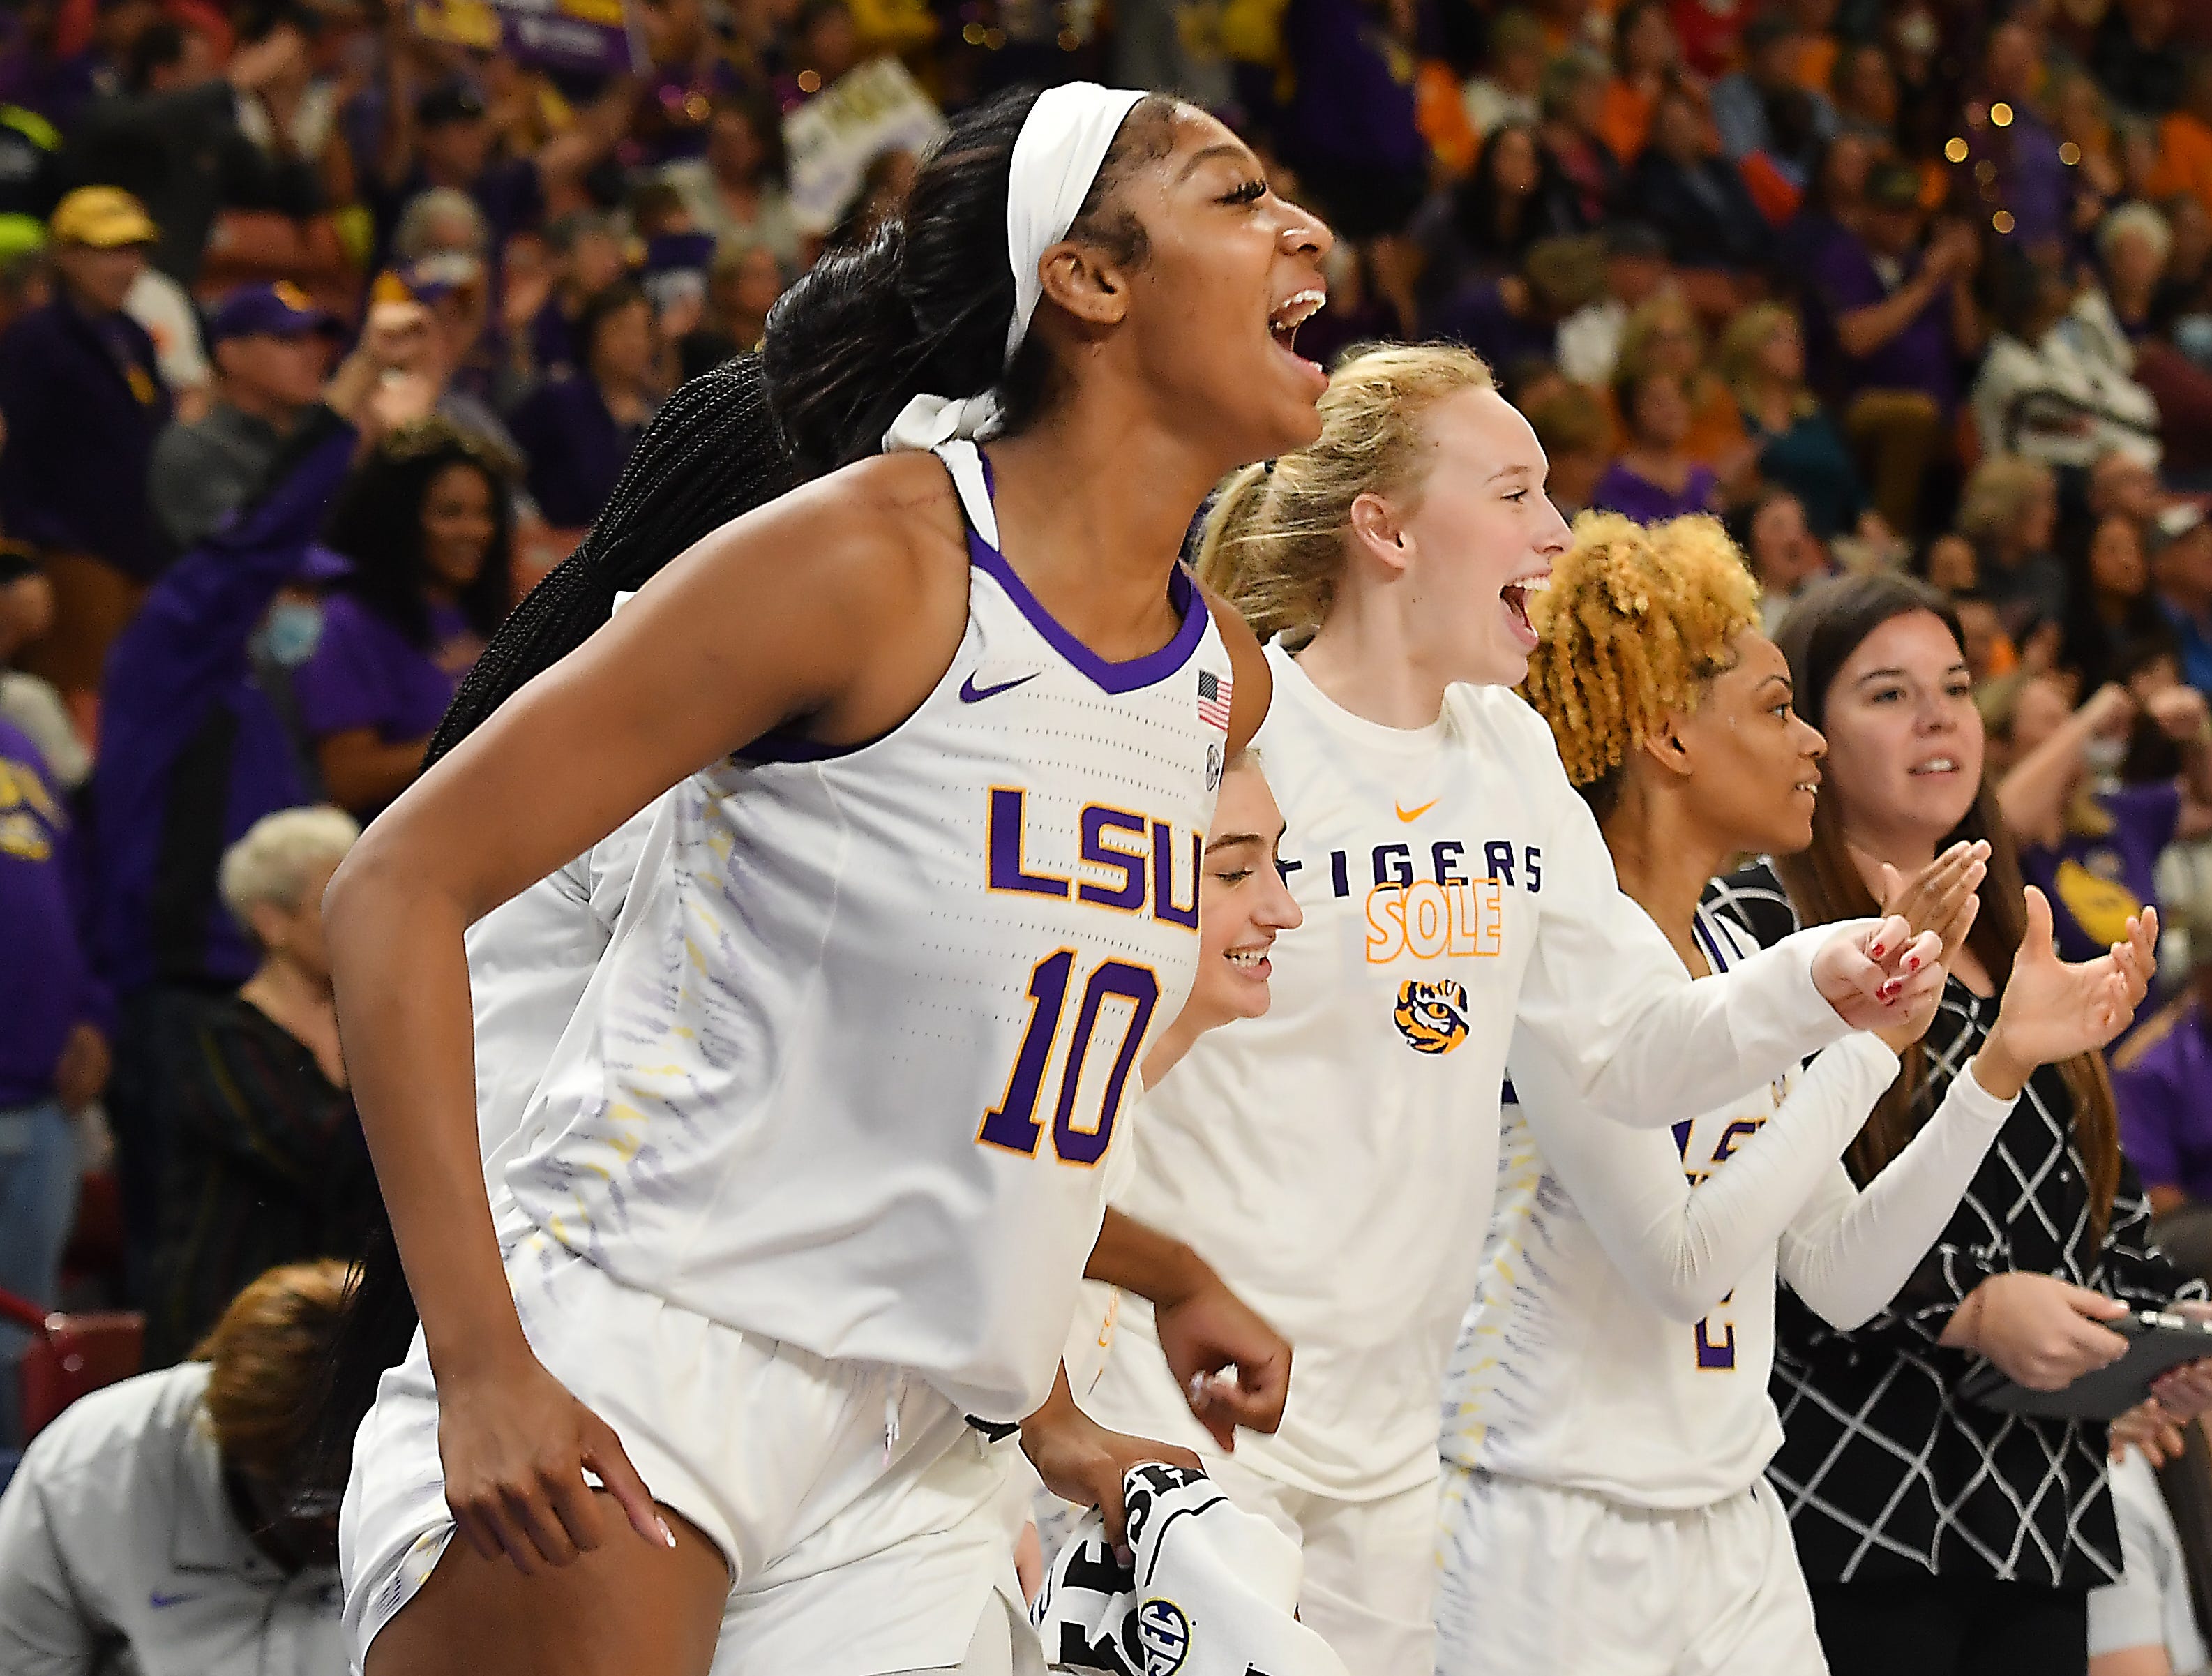 Georgia took on LSU in the SEC Women's Basketball Tournament  quarterfinals at the Bon Secours Wellness Arena in Greenville, S.C. Friday, March 3, 2023.  Louisiana State University forward Angel Reese (10) cheers for her team.